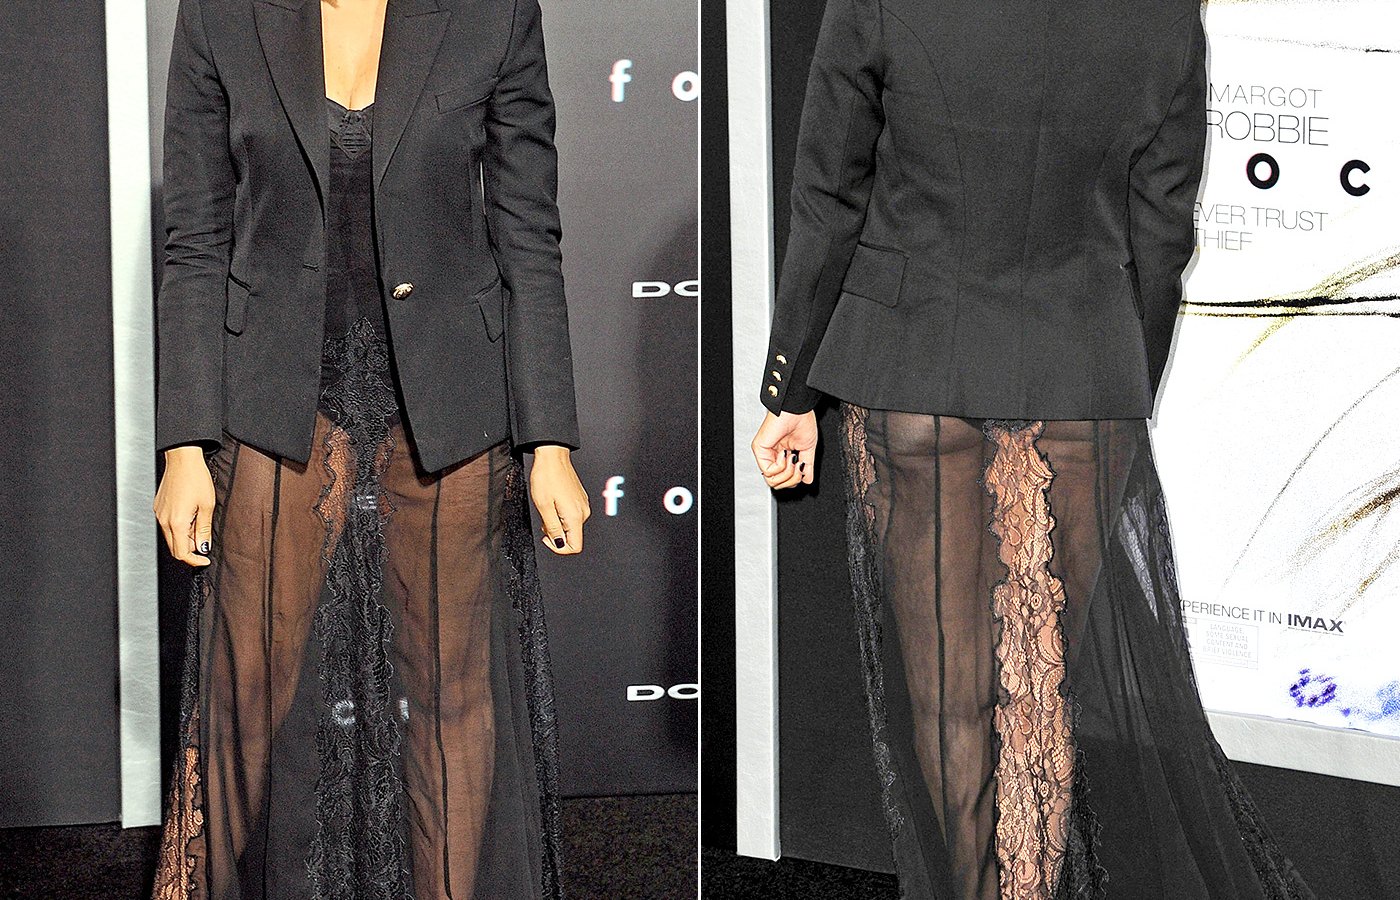 Tia Mowry wears a sheer skirt to the Focus premiere on Feb. 24, 2015.